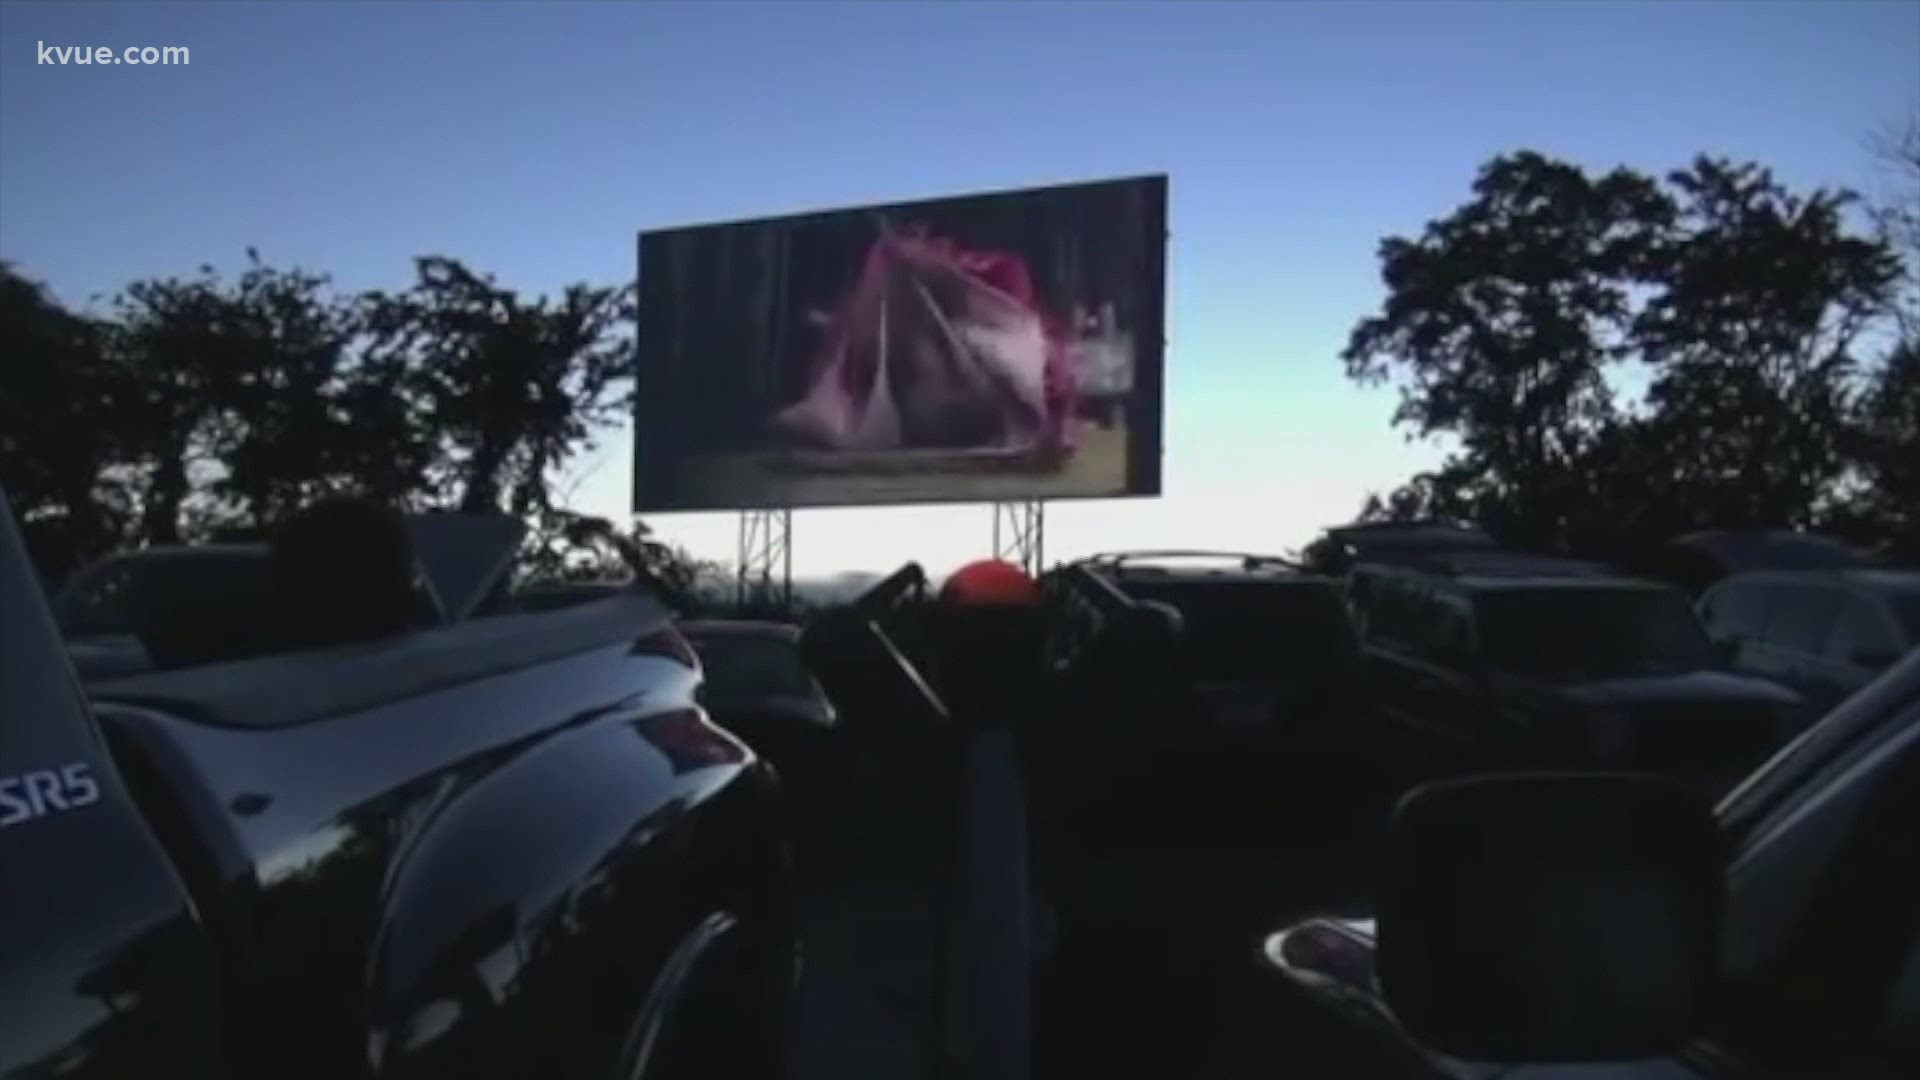 On The Back Story, we take a look at the history of drive-in theaters in Austin. Drive-ins have had a resurgence during the pandemic.